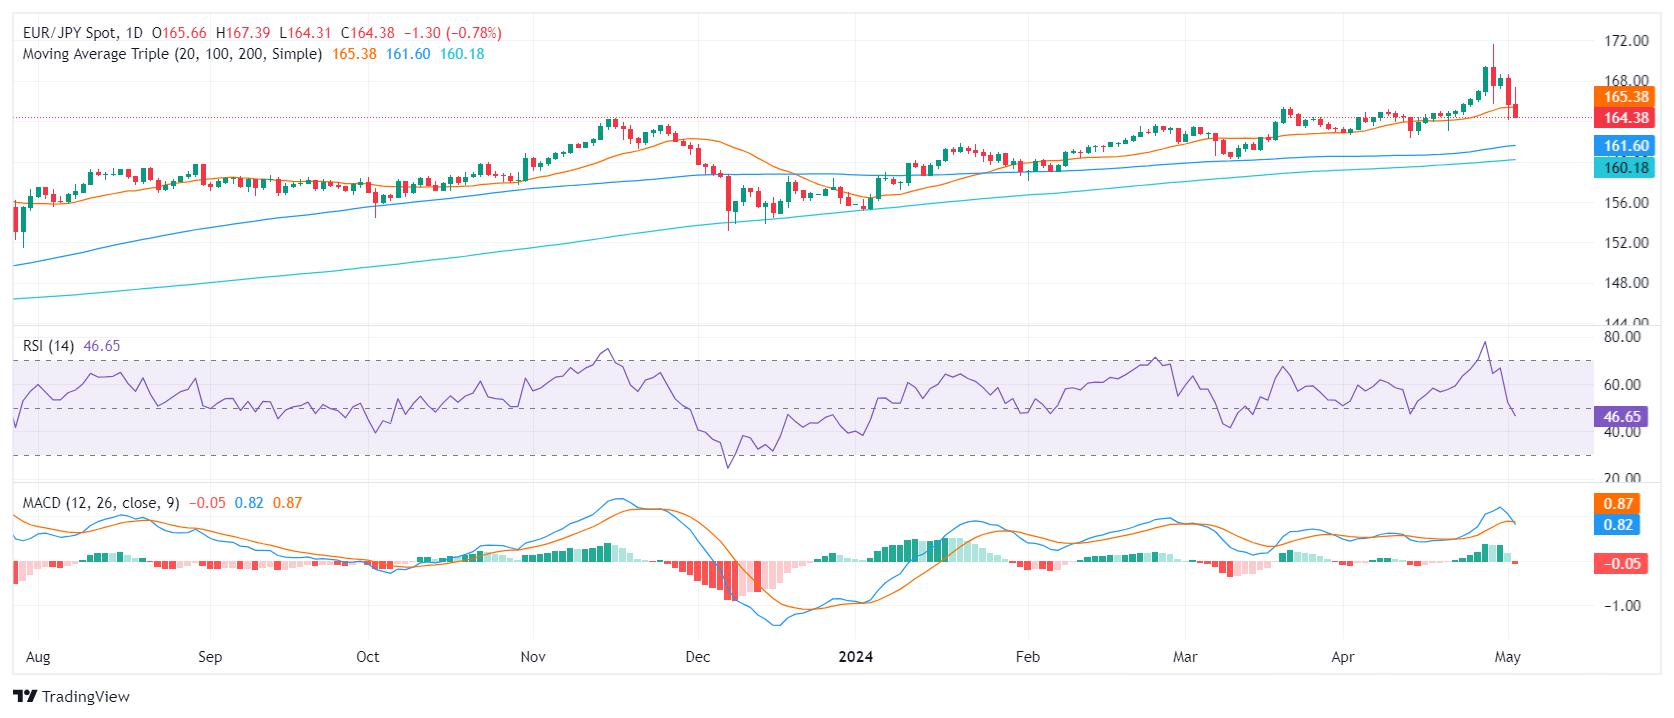 EUR/JPY Price Analysis: Bearish sentiment takes over, 20-day SMA lost